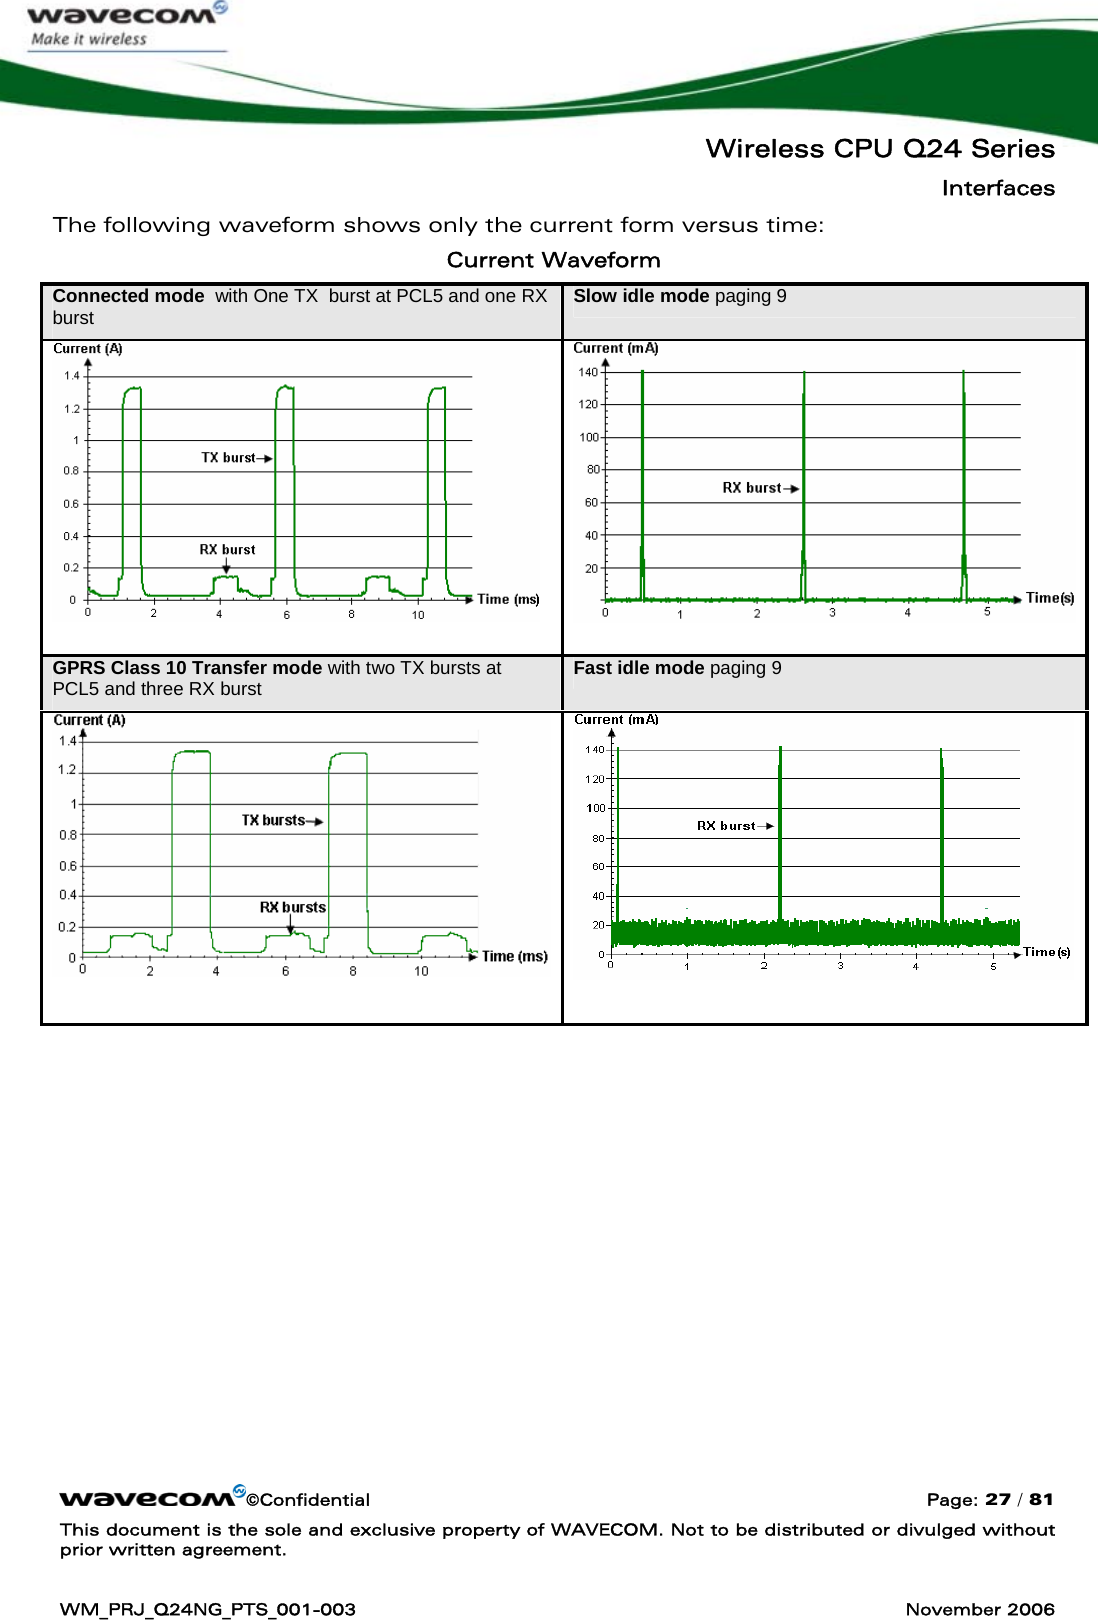   Wireless CPU Q24 Series Interfaces ©Confidential  Page: 27 / 81 This document is the sole and exclusive property of WAVECOM. Not to be distributed or divulged without prior written agreement.  WM_PRJ_Q24NG_PTS_001-003  November 2006  The following waveform shows only the current form versus time: Current Waveform Connected mode  with One TX  burst at PCL5 and one RX burst   Slow idle mode paging 9   GPRS Class 10 Transfer mode with two TX bursts at PCL5 and three RX burst  Fast idle mode paging 9   